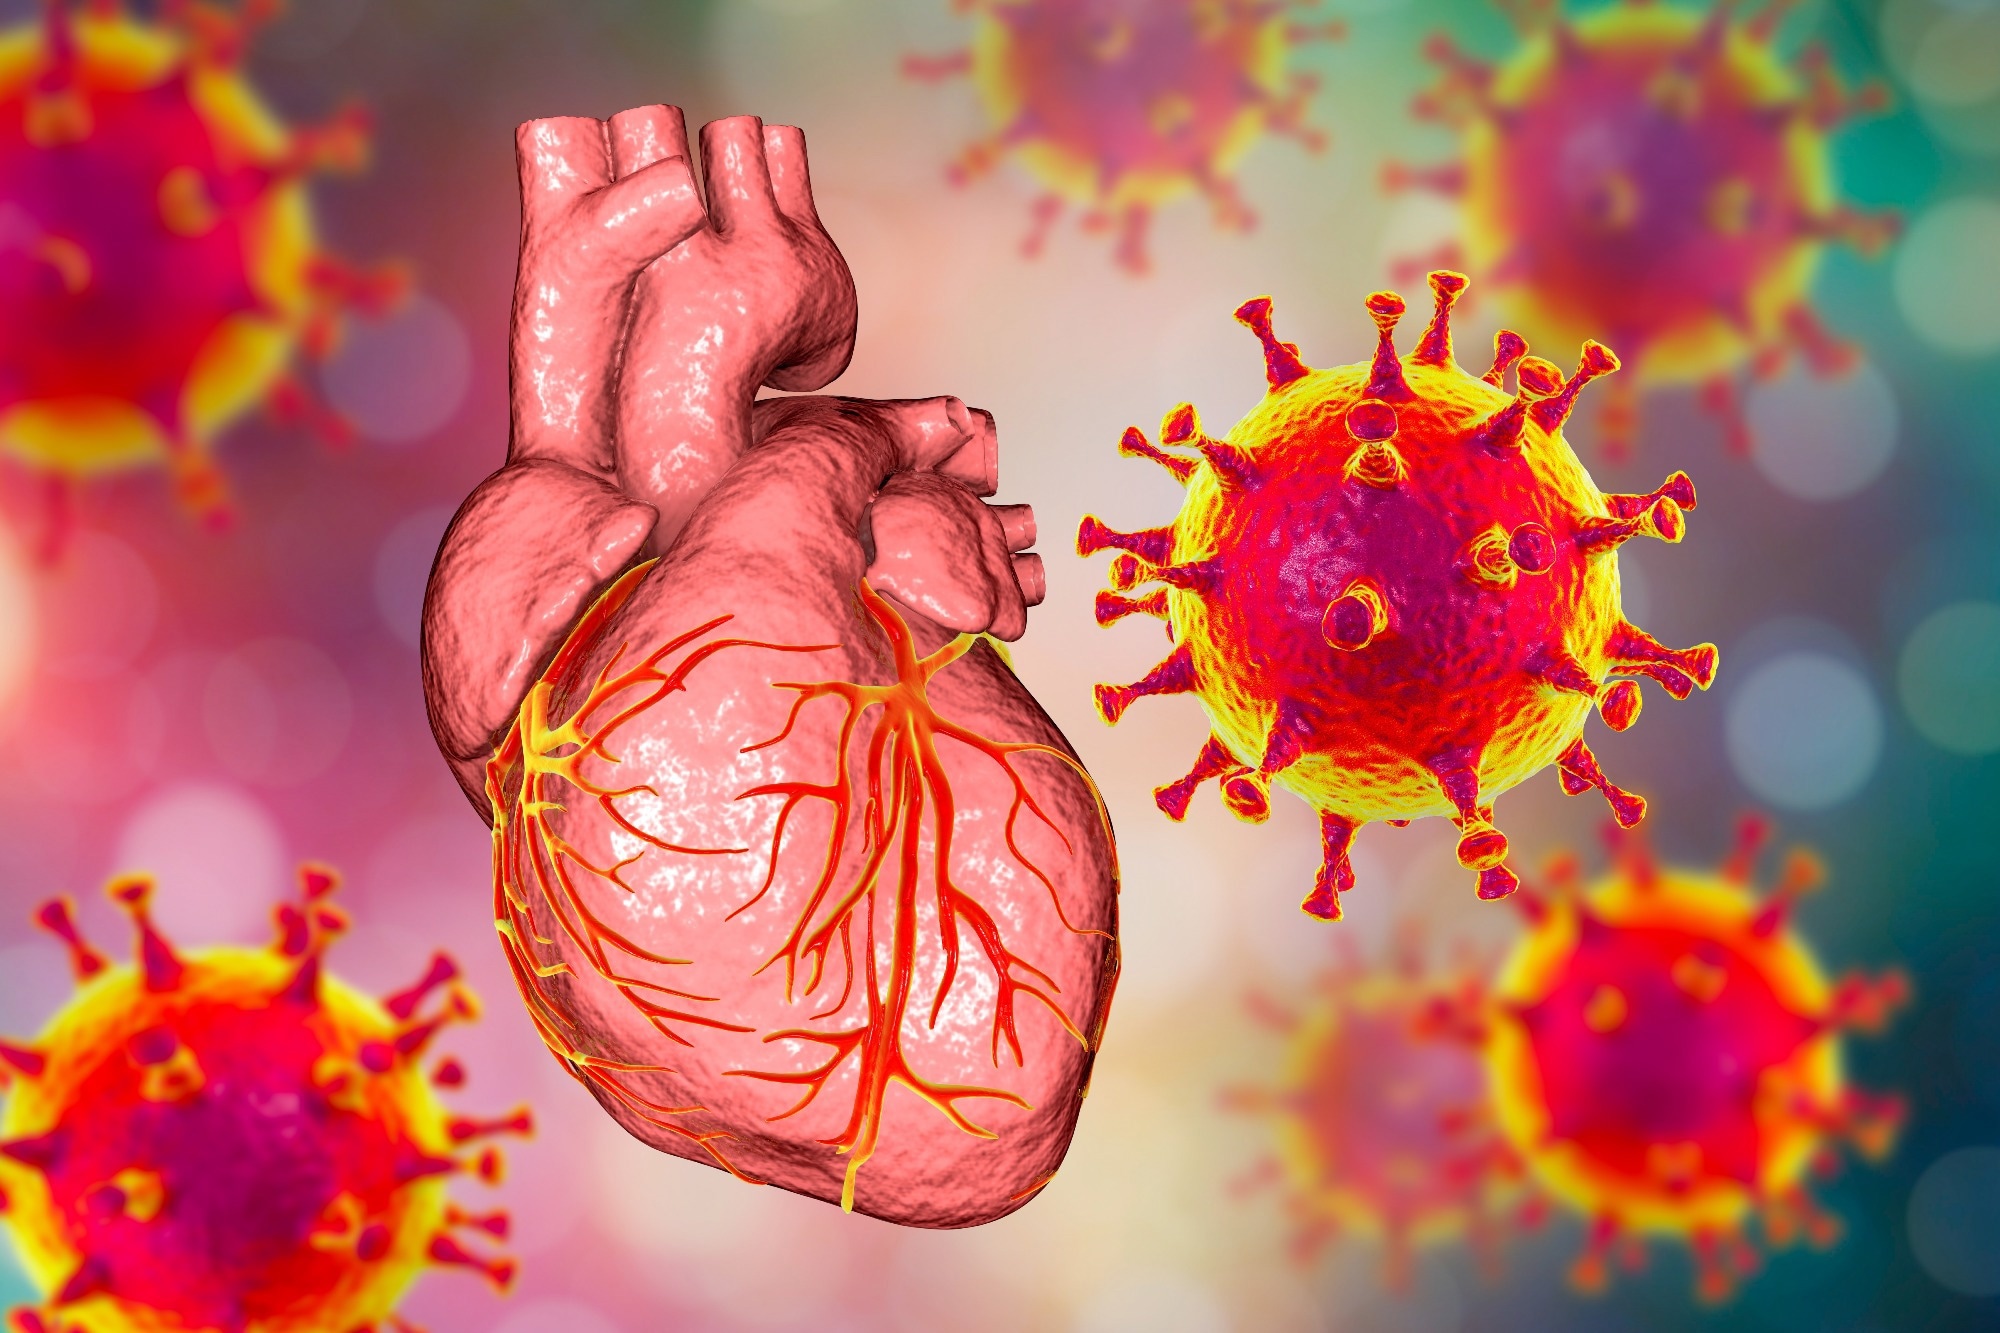 Study: Virus-Induced Acute Respiratory Distress Syndrome Causes Cardiomyopathy Through Eliciting Inflammatory Responses in the Heart. Image Credit: Kateryna Kon / Shutterstock